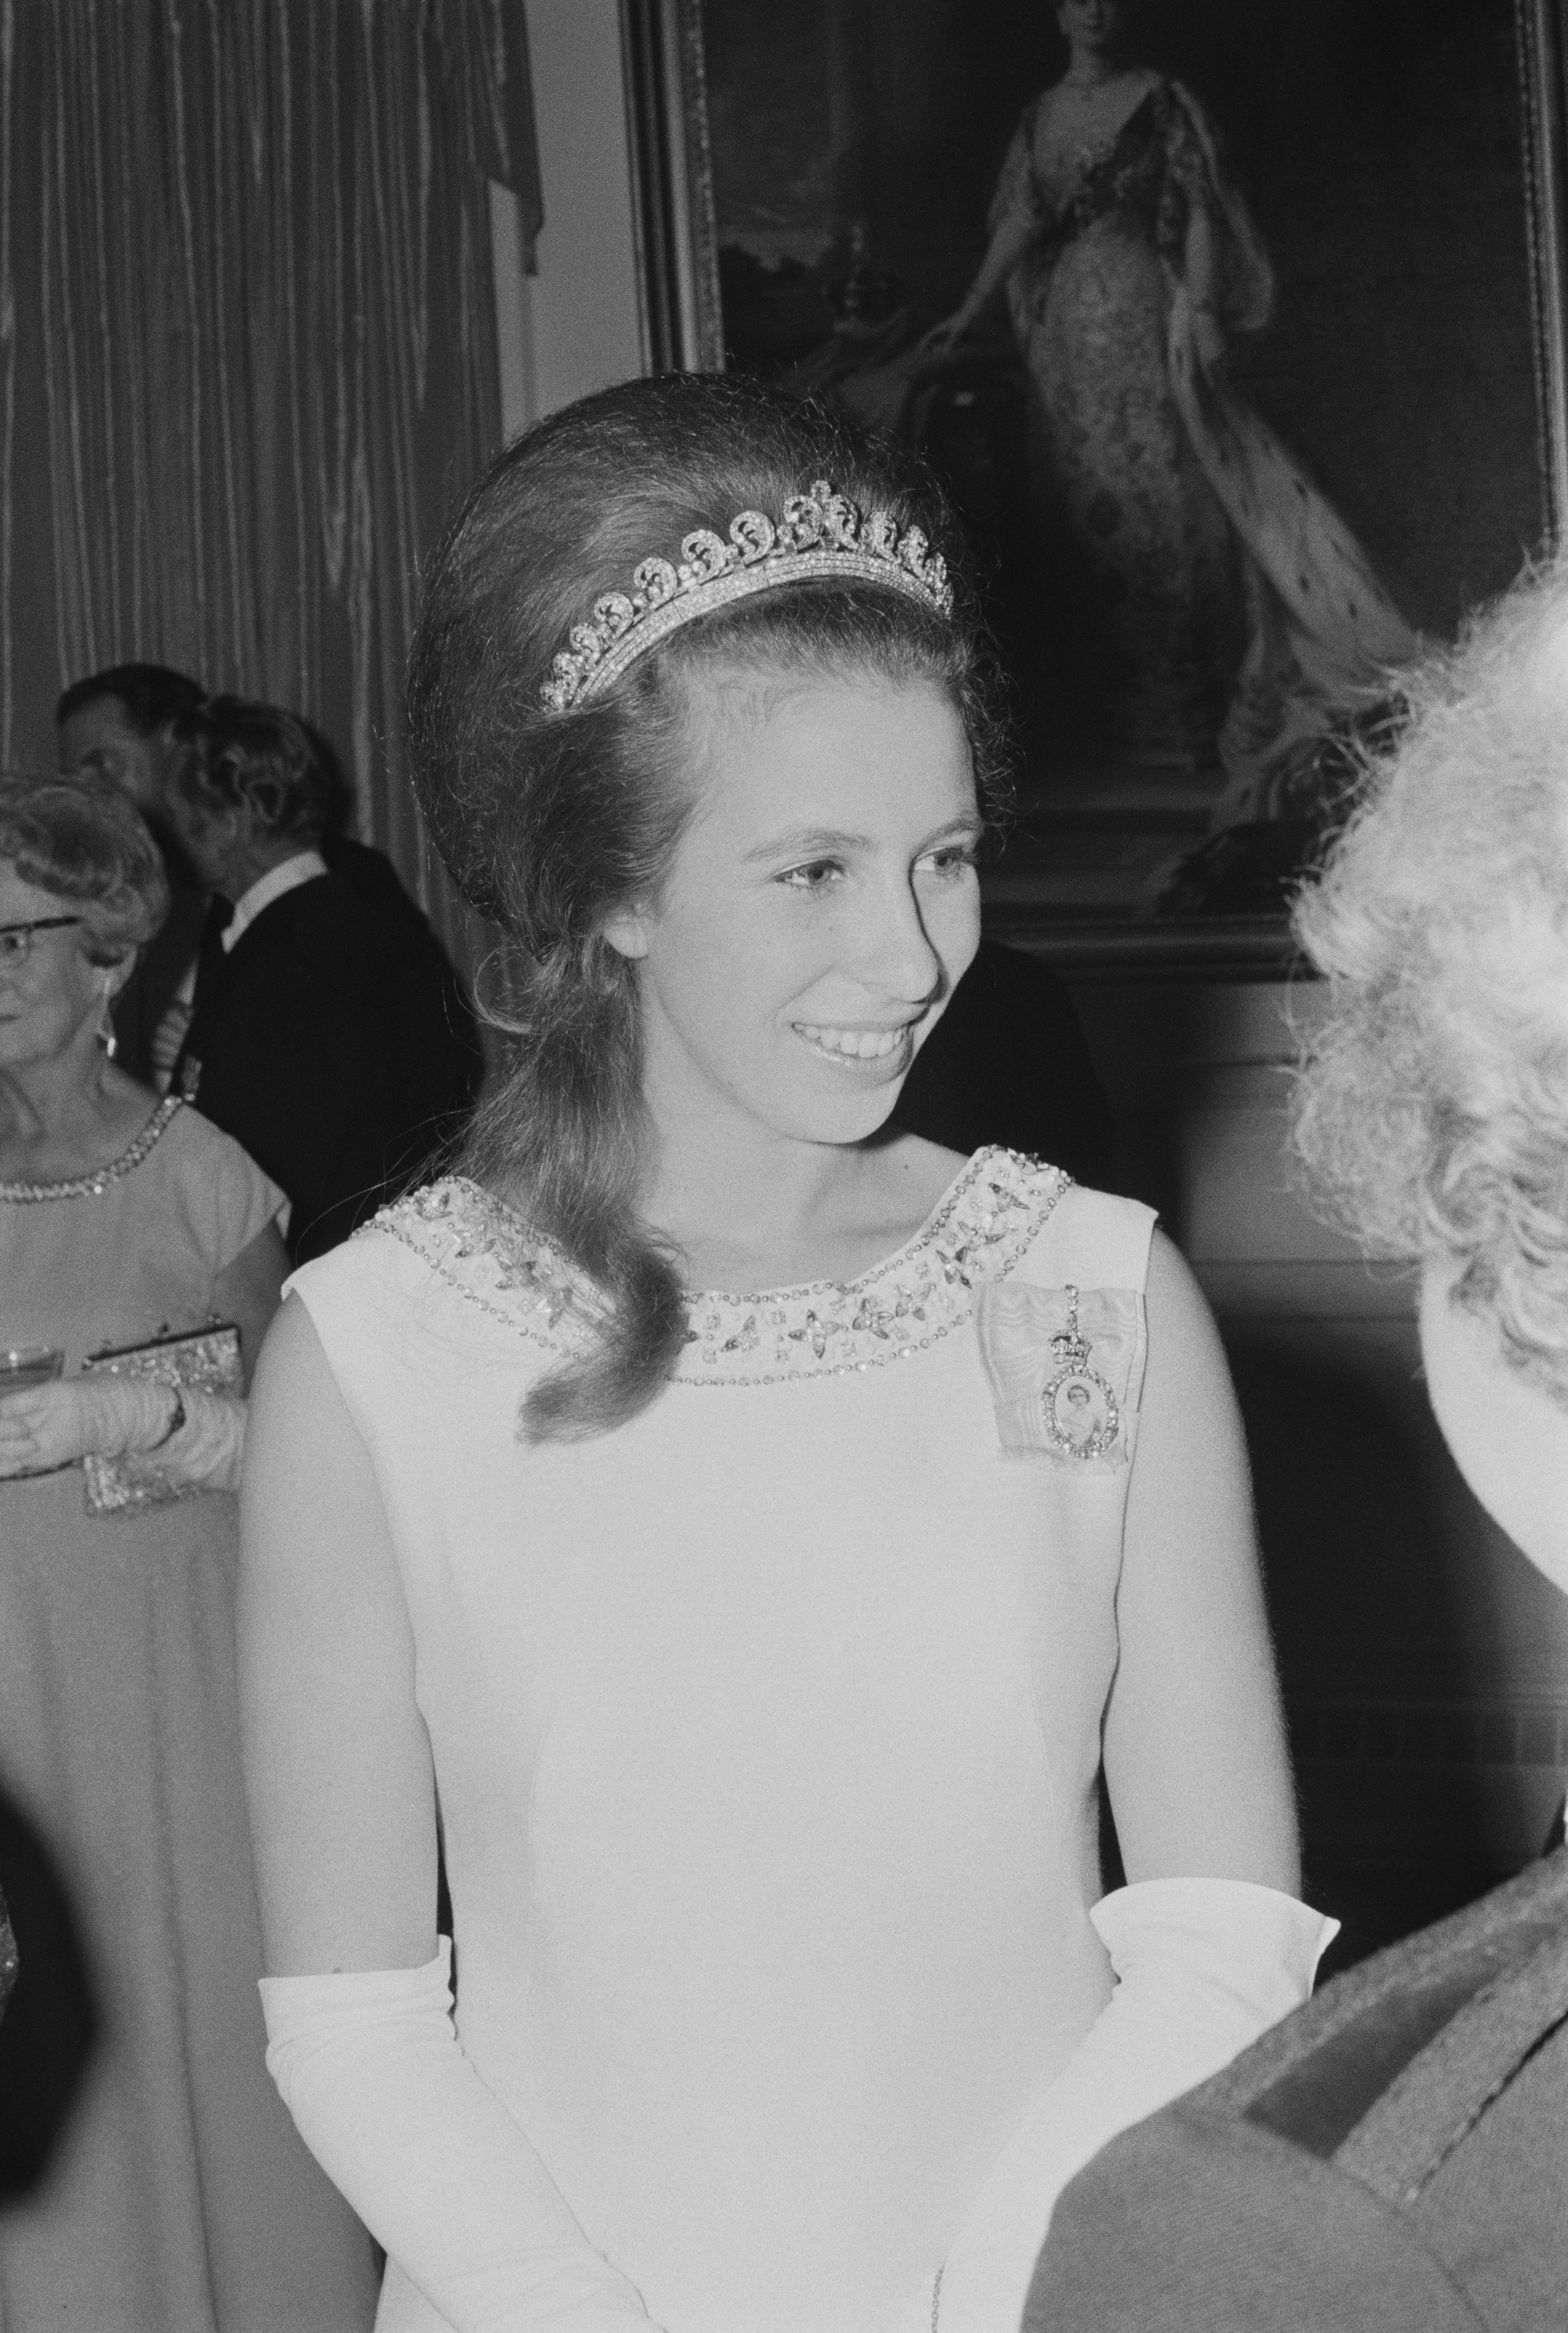 Princess Anne attends a formal event during a visit to New Zealand on March 16, 1970 | Photo: Getty Images